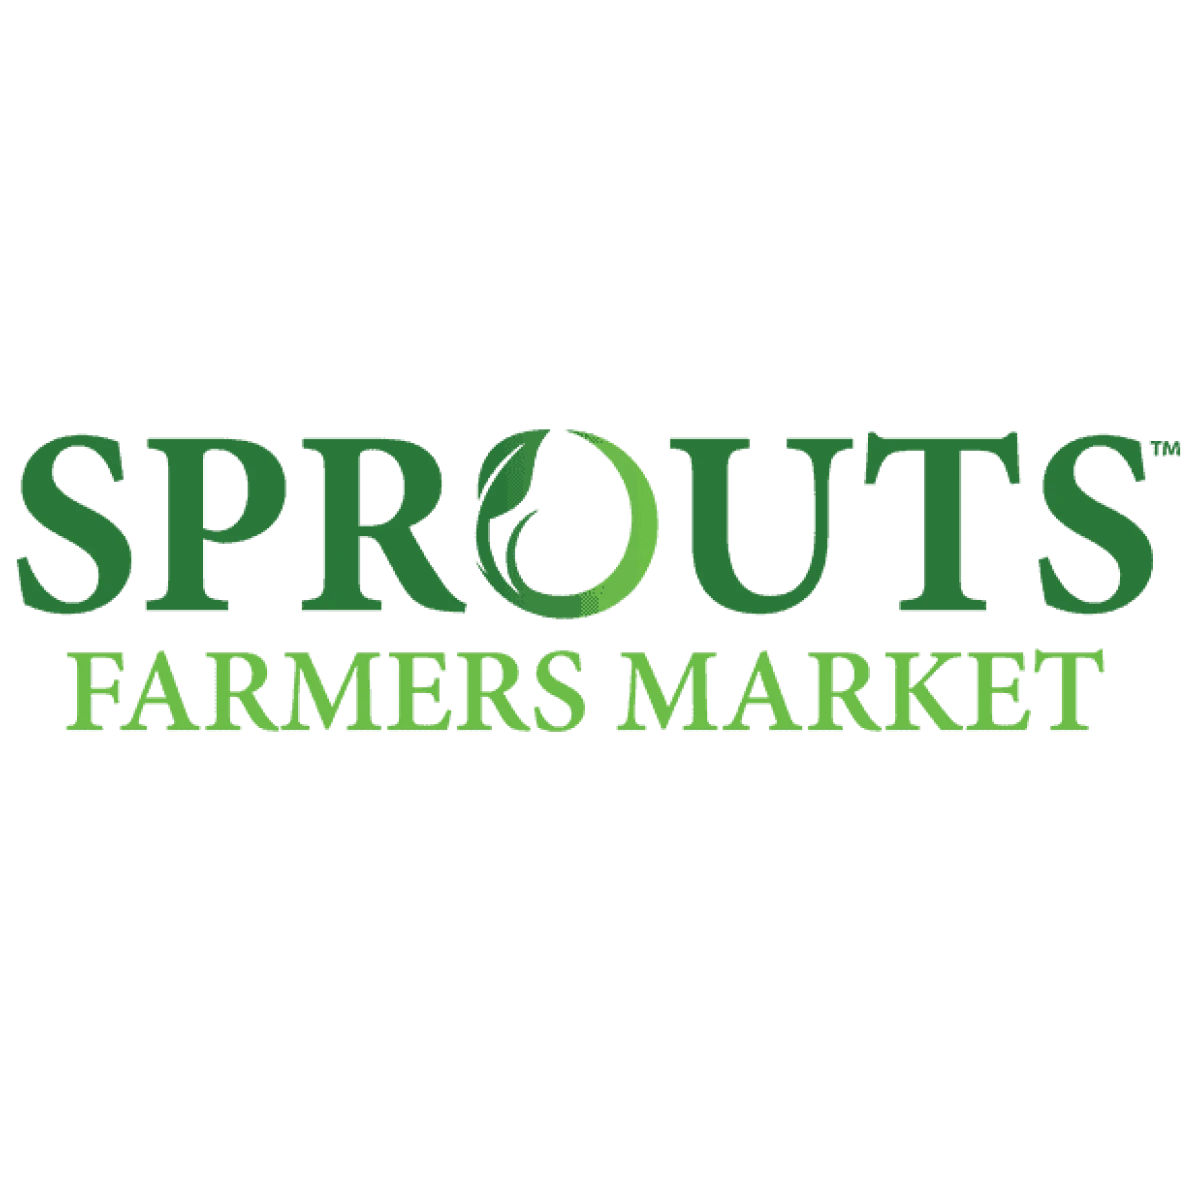 Sprouts grocery store horizontal logo